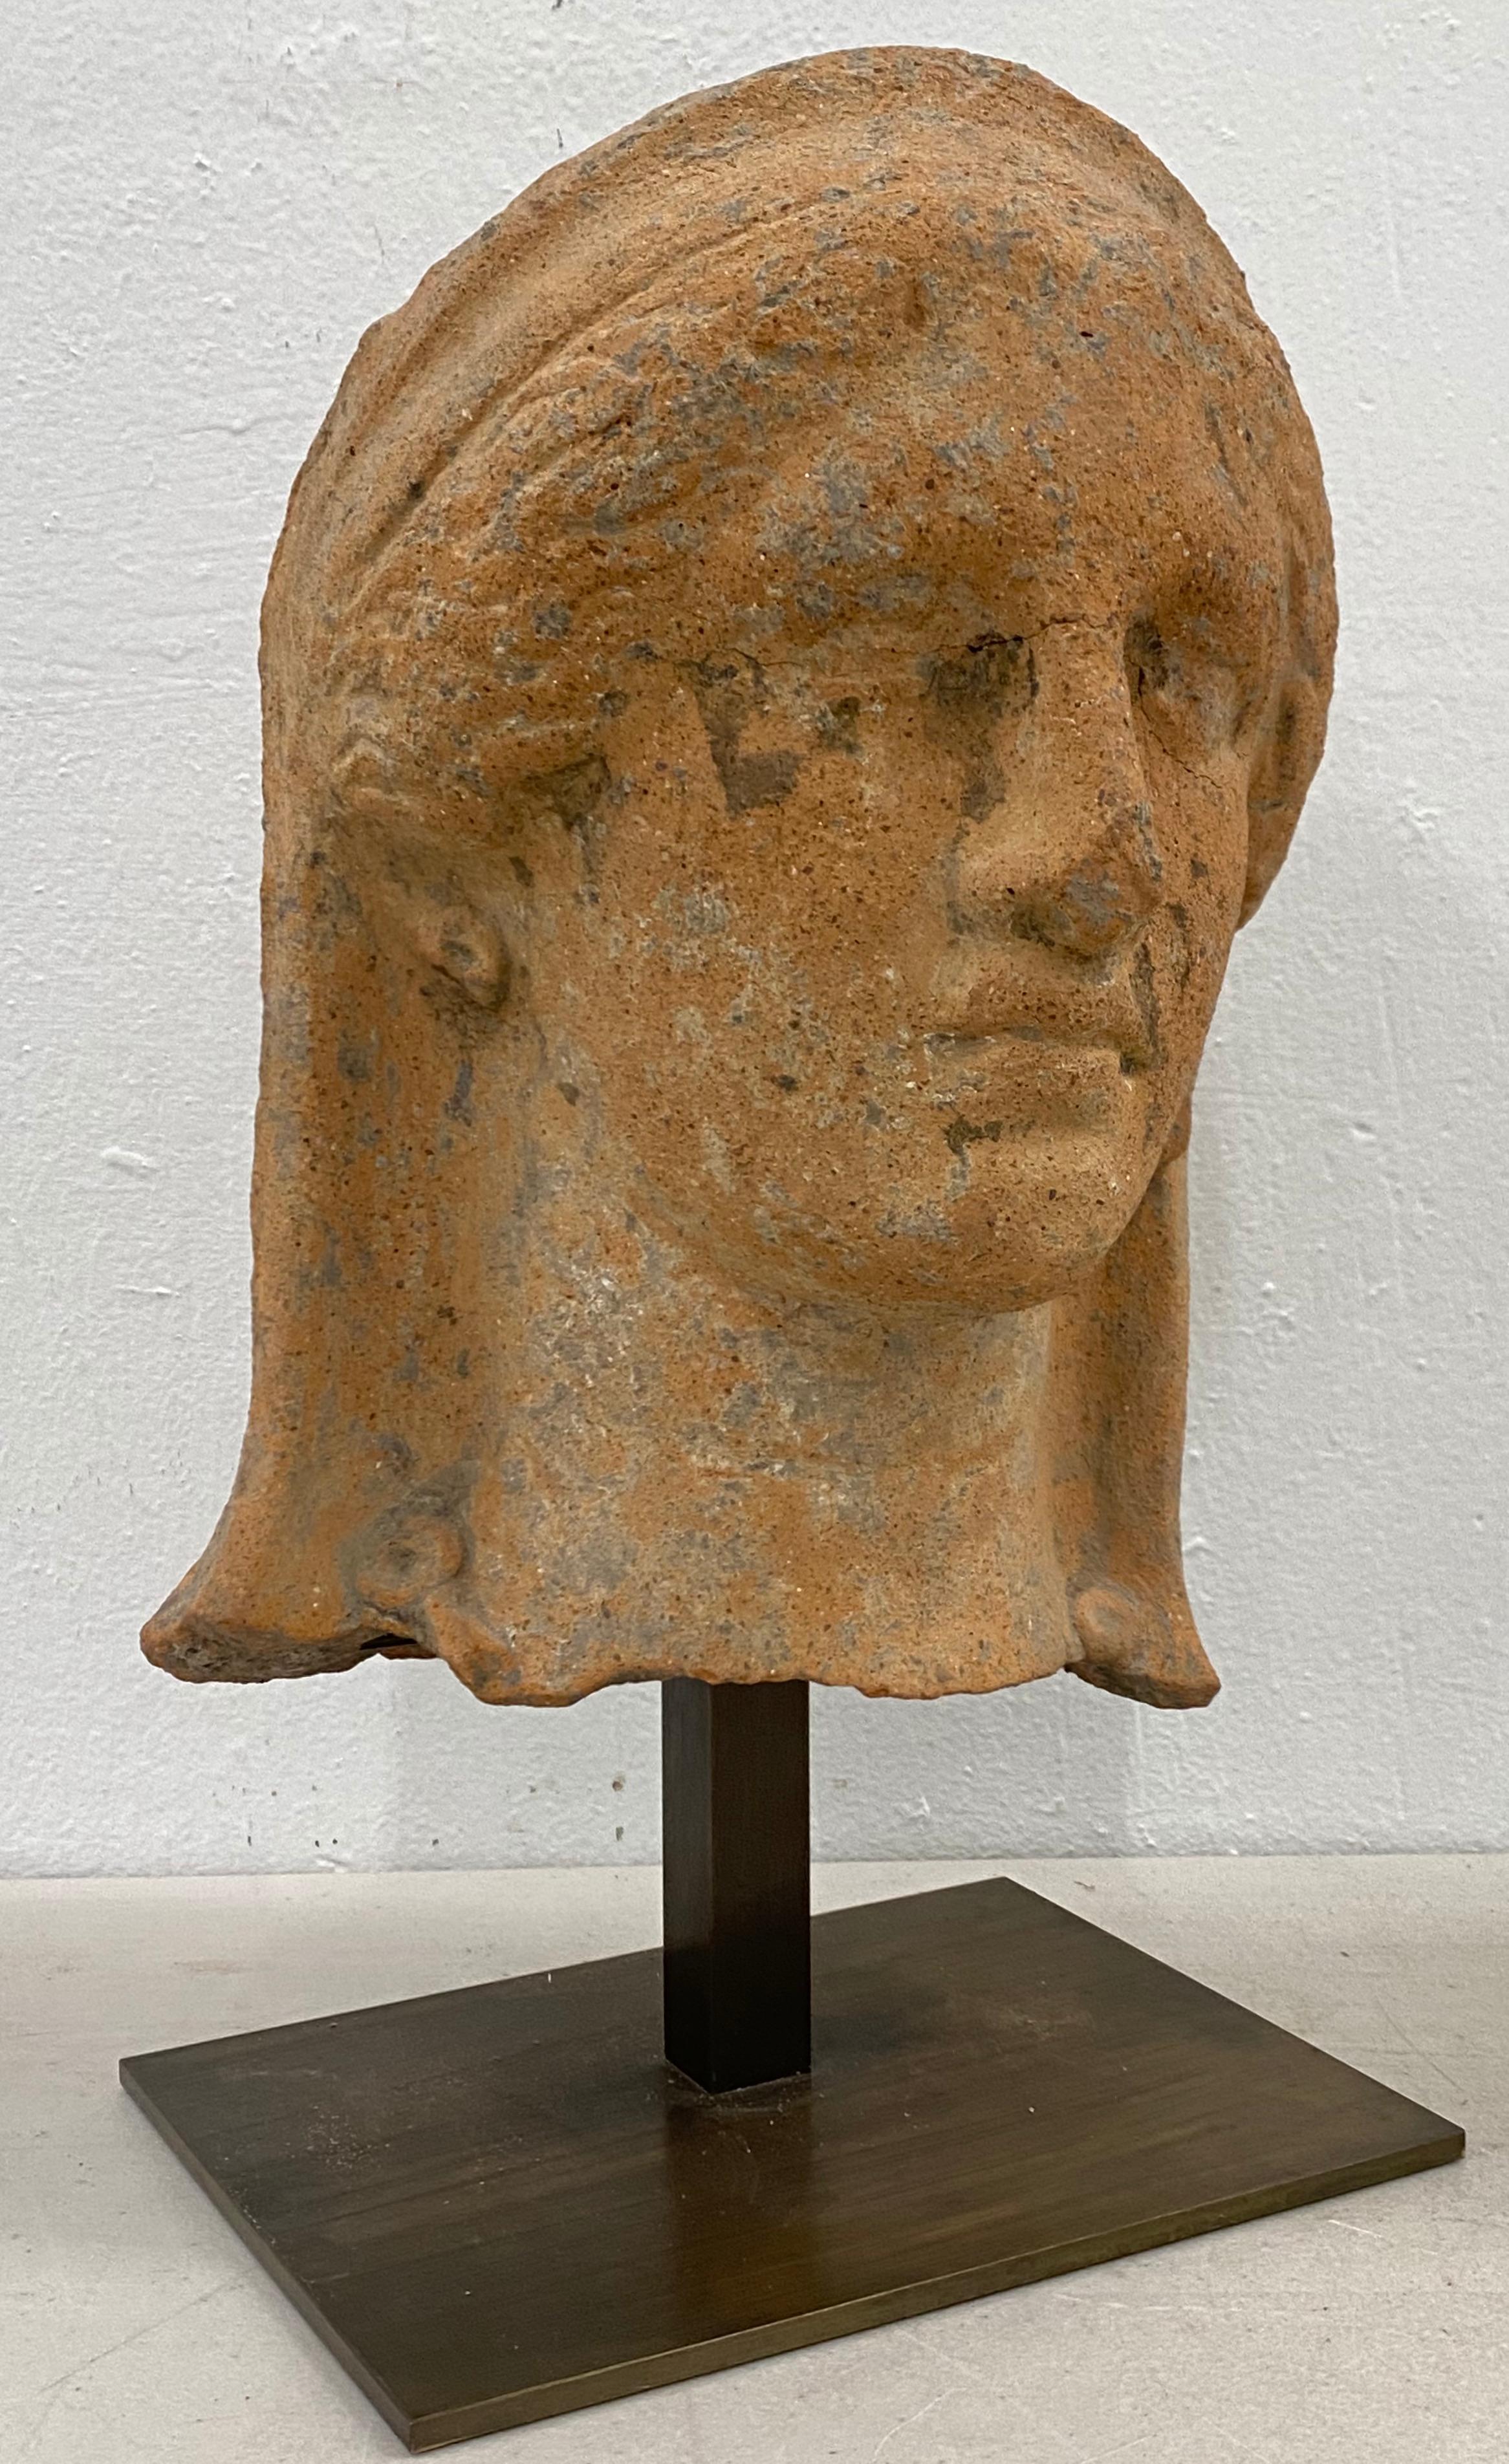 Etruscan antiquity terracotta head with stand

The terracotta measures 9